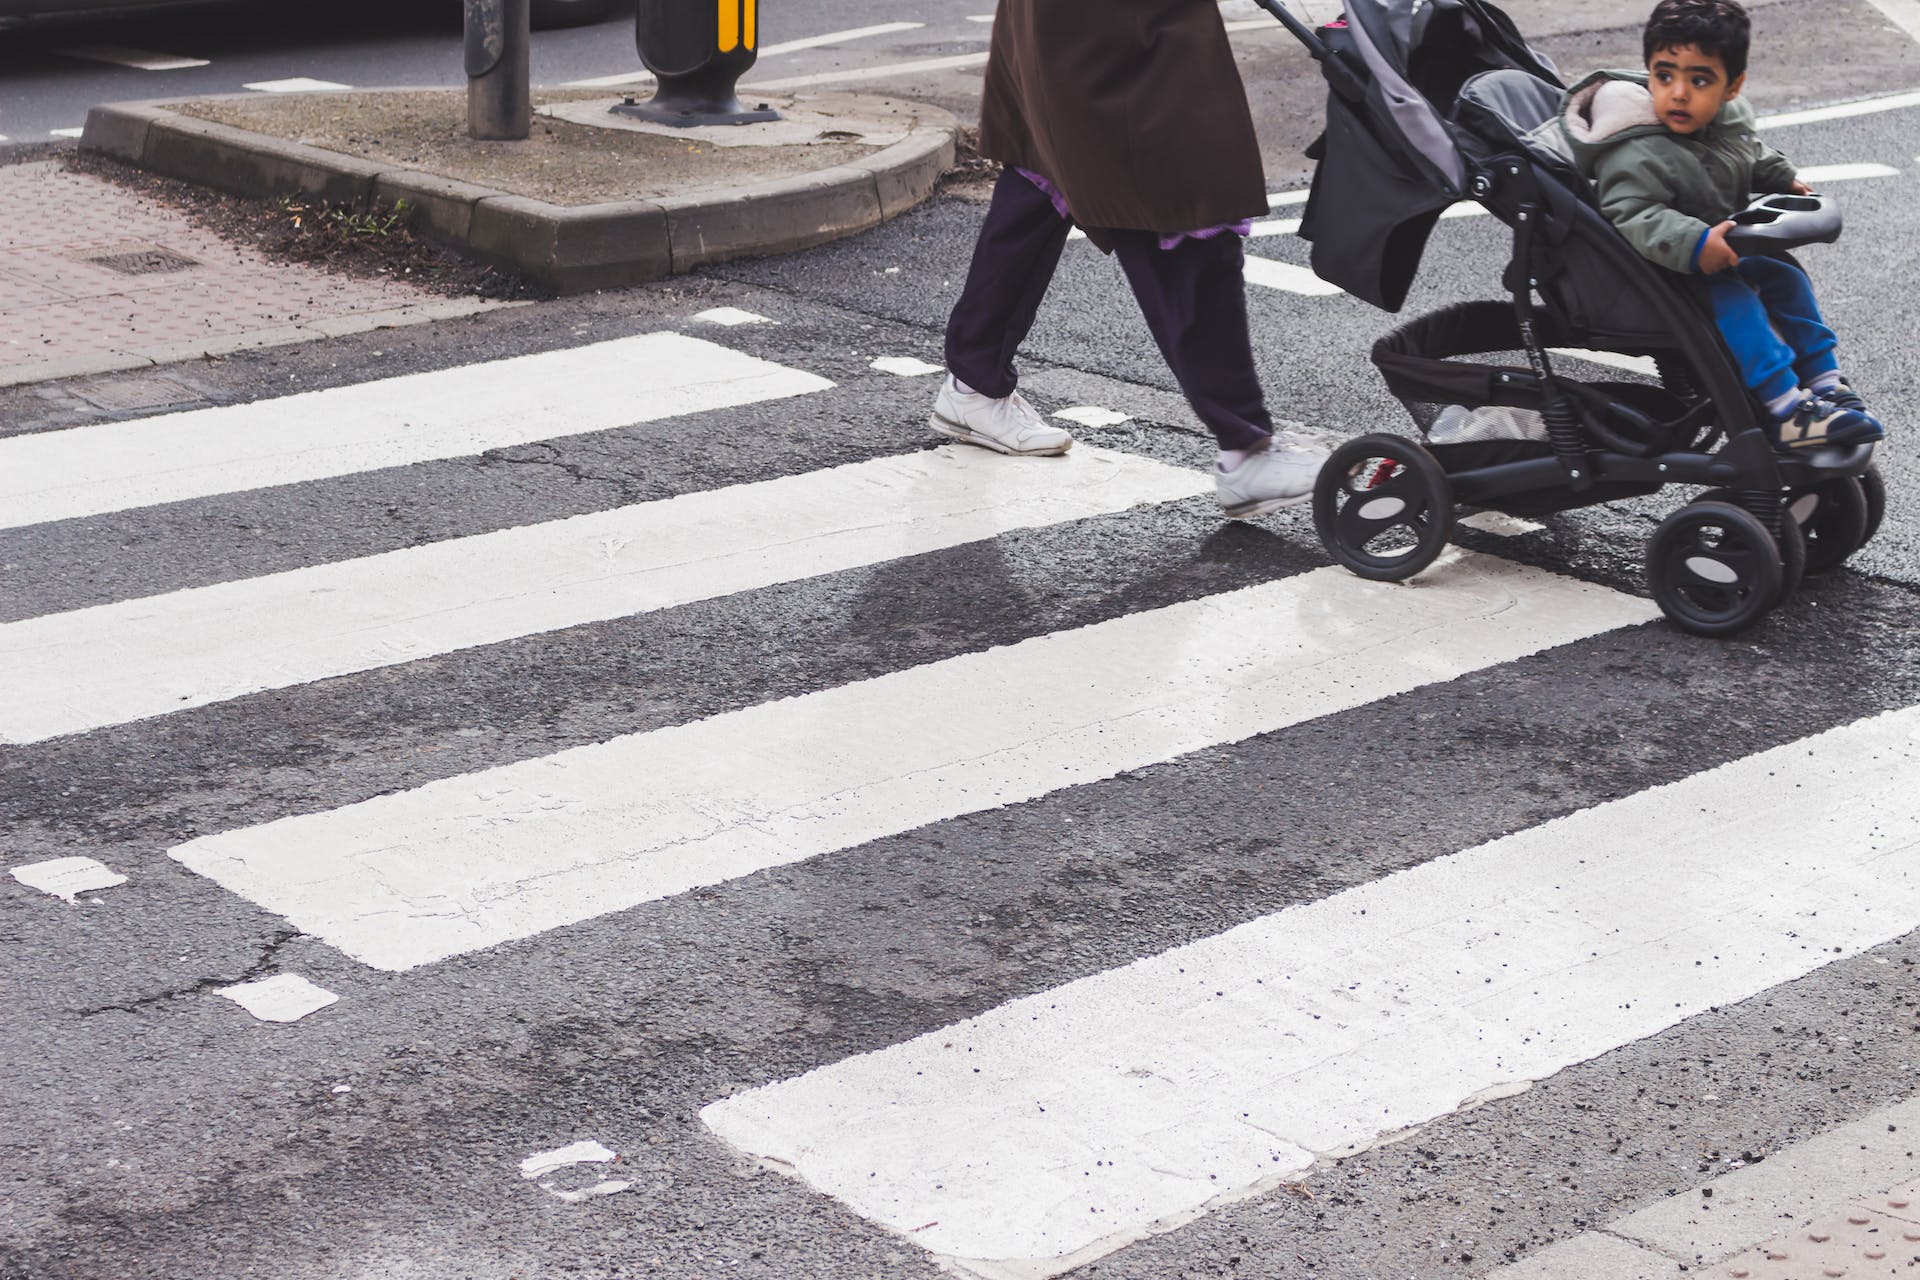 An individual pushes a stroller, with a toddler inside, as they cross the bustling city street, both taking in the urban scenery.